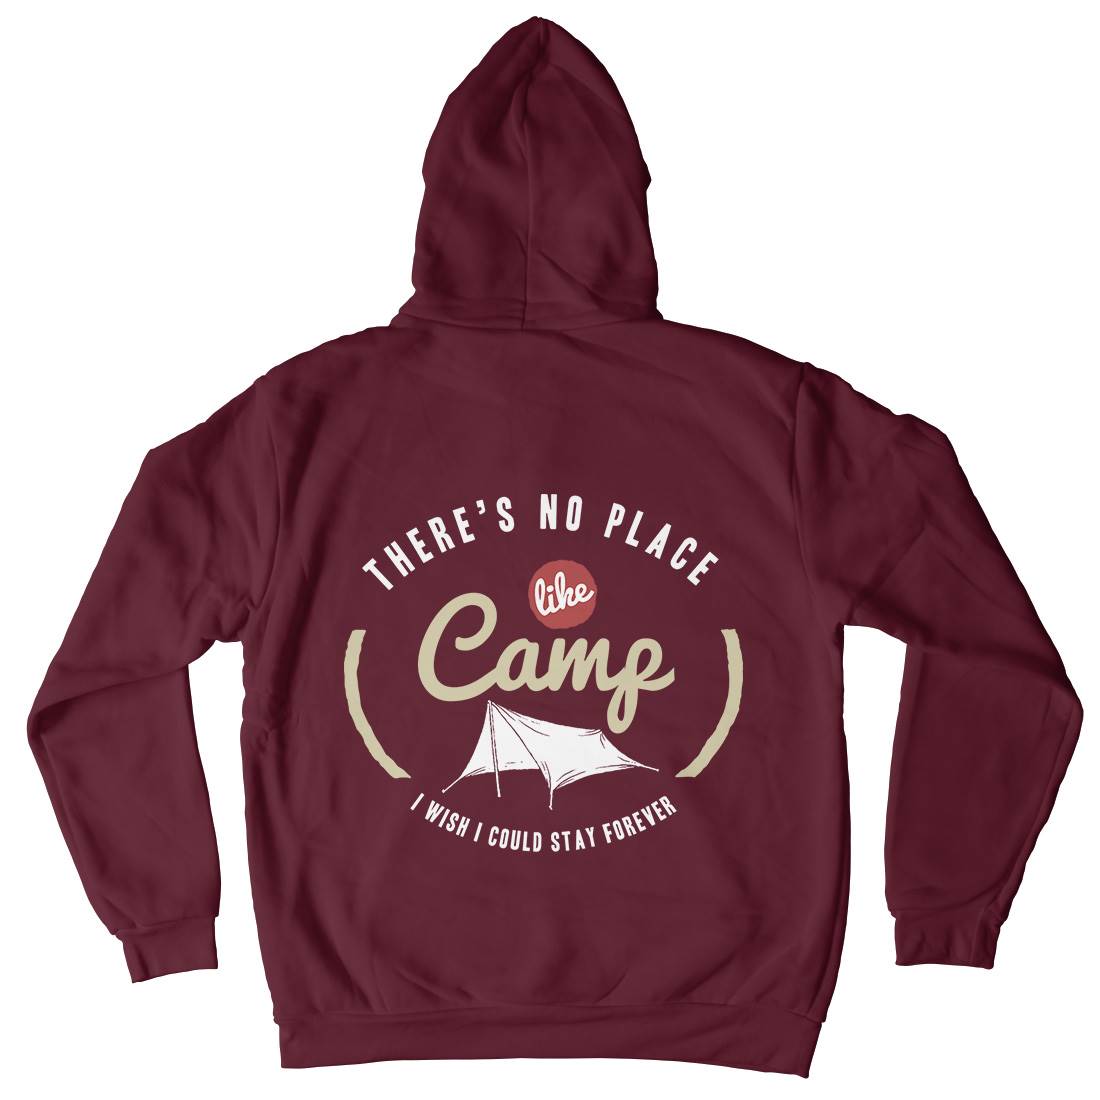 No Place Like Camp Kids Crew Neck Hoodie Nature A353